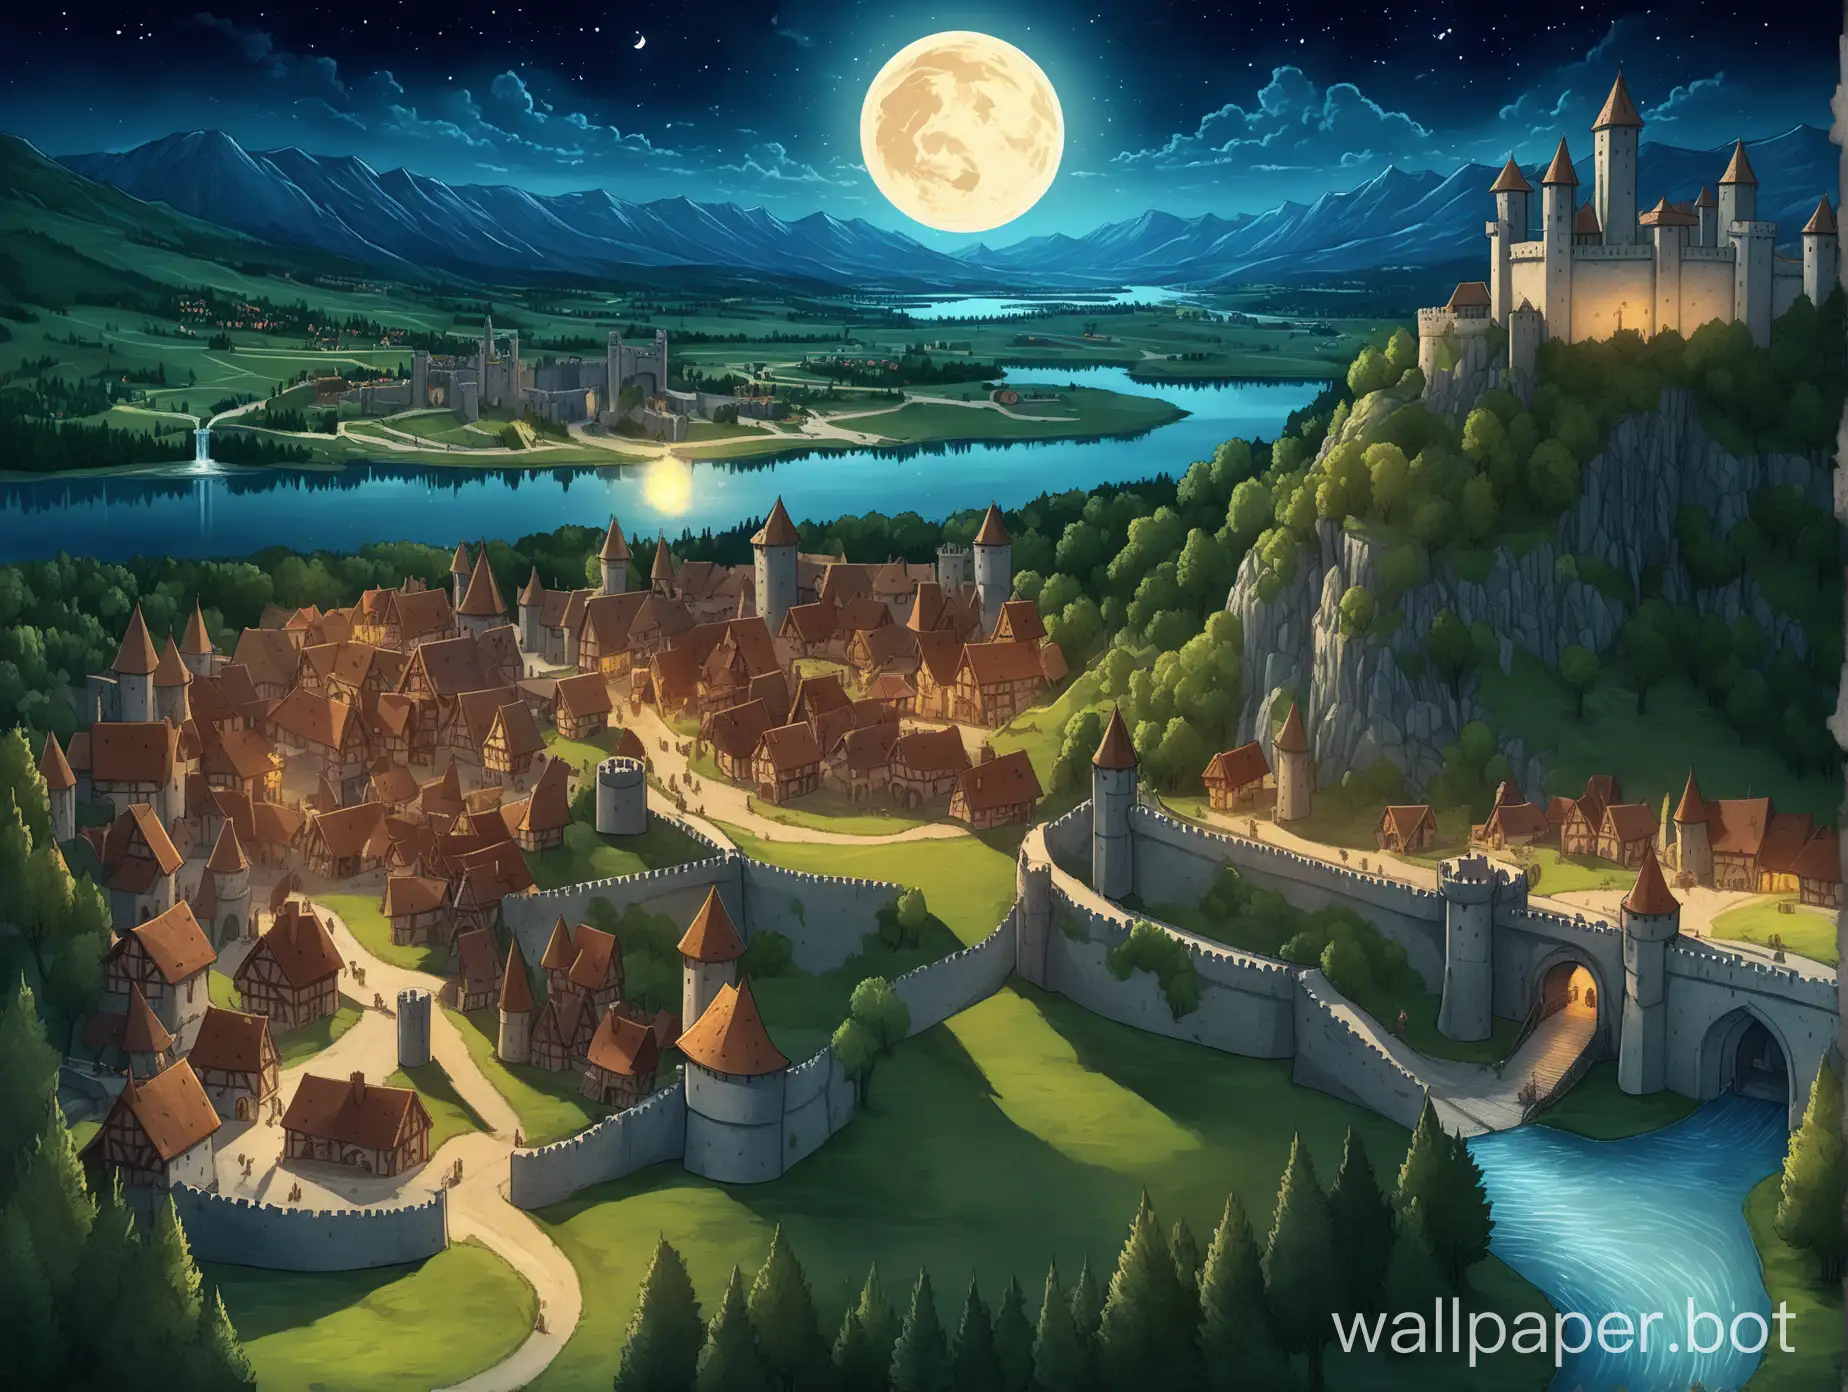 Medieval-Village-Amidst-Mountain-Landscape-Aerial-Night-View-with-Drawbridge-Entrance